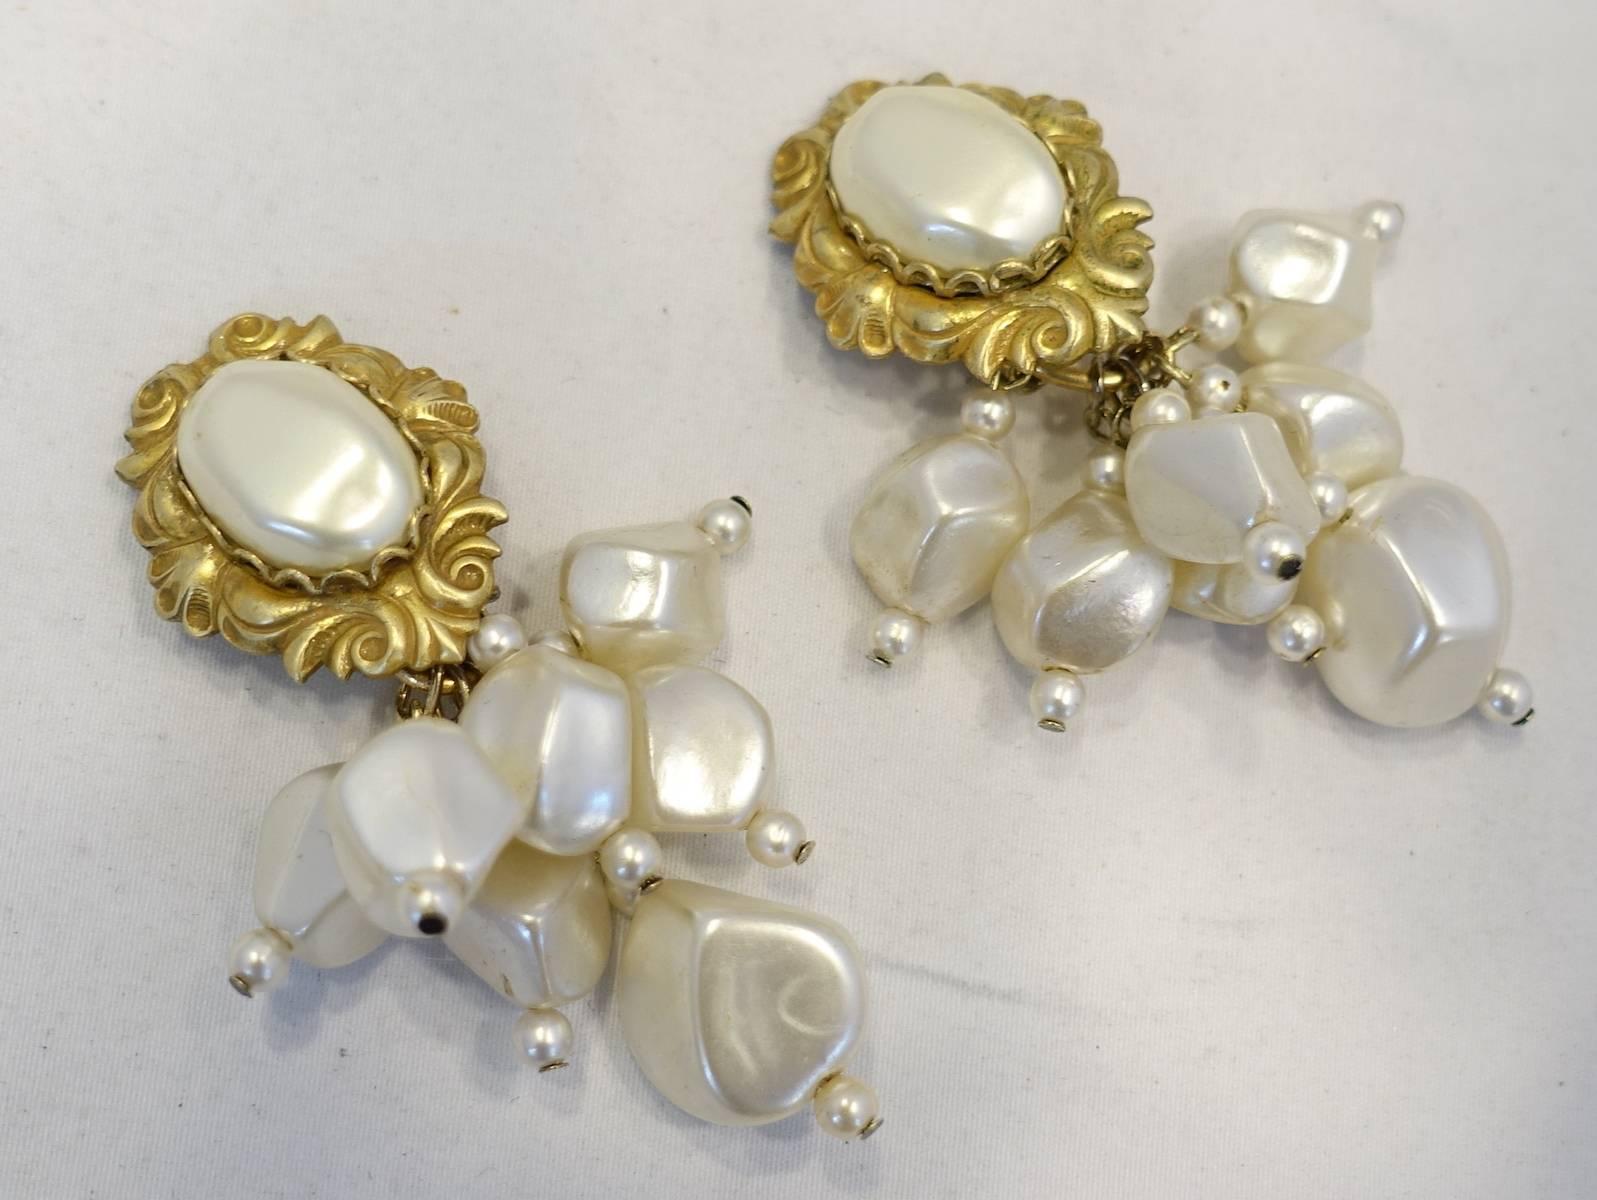 These vintage signed DeMario earrings feature faux pearls in a gold tone setting. These clip earrings measure 2-5/8” x 1-1/2” and are signed “DeMario”. They are in excellent condition.